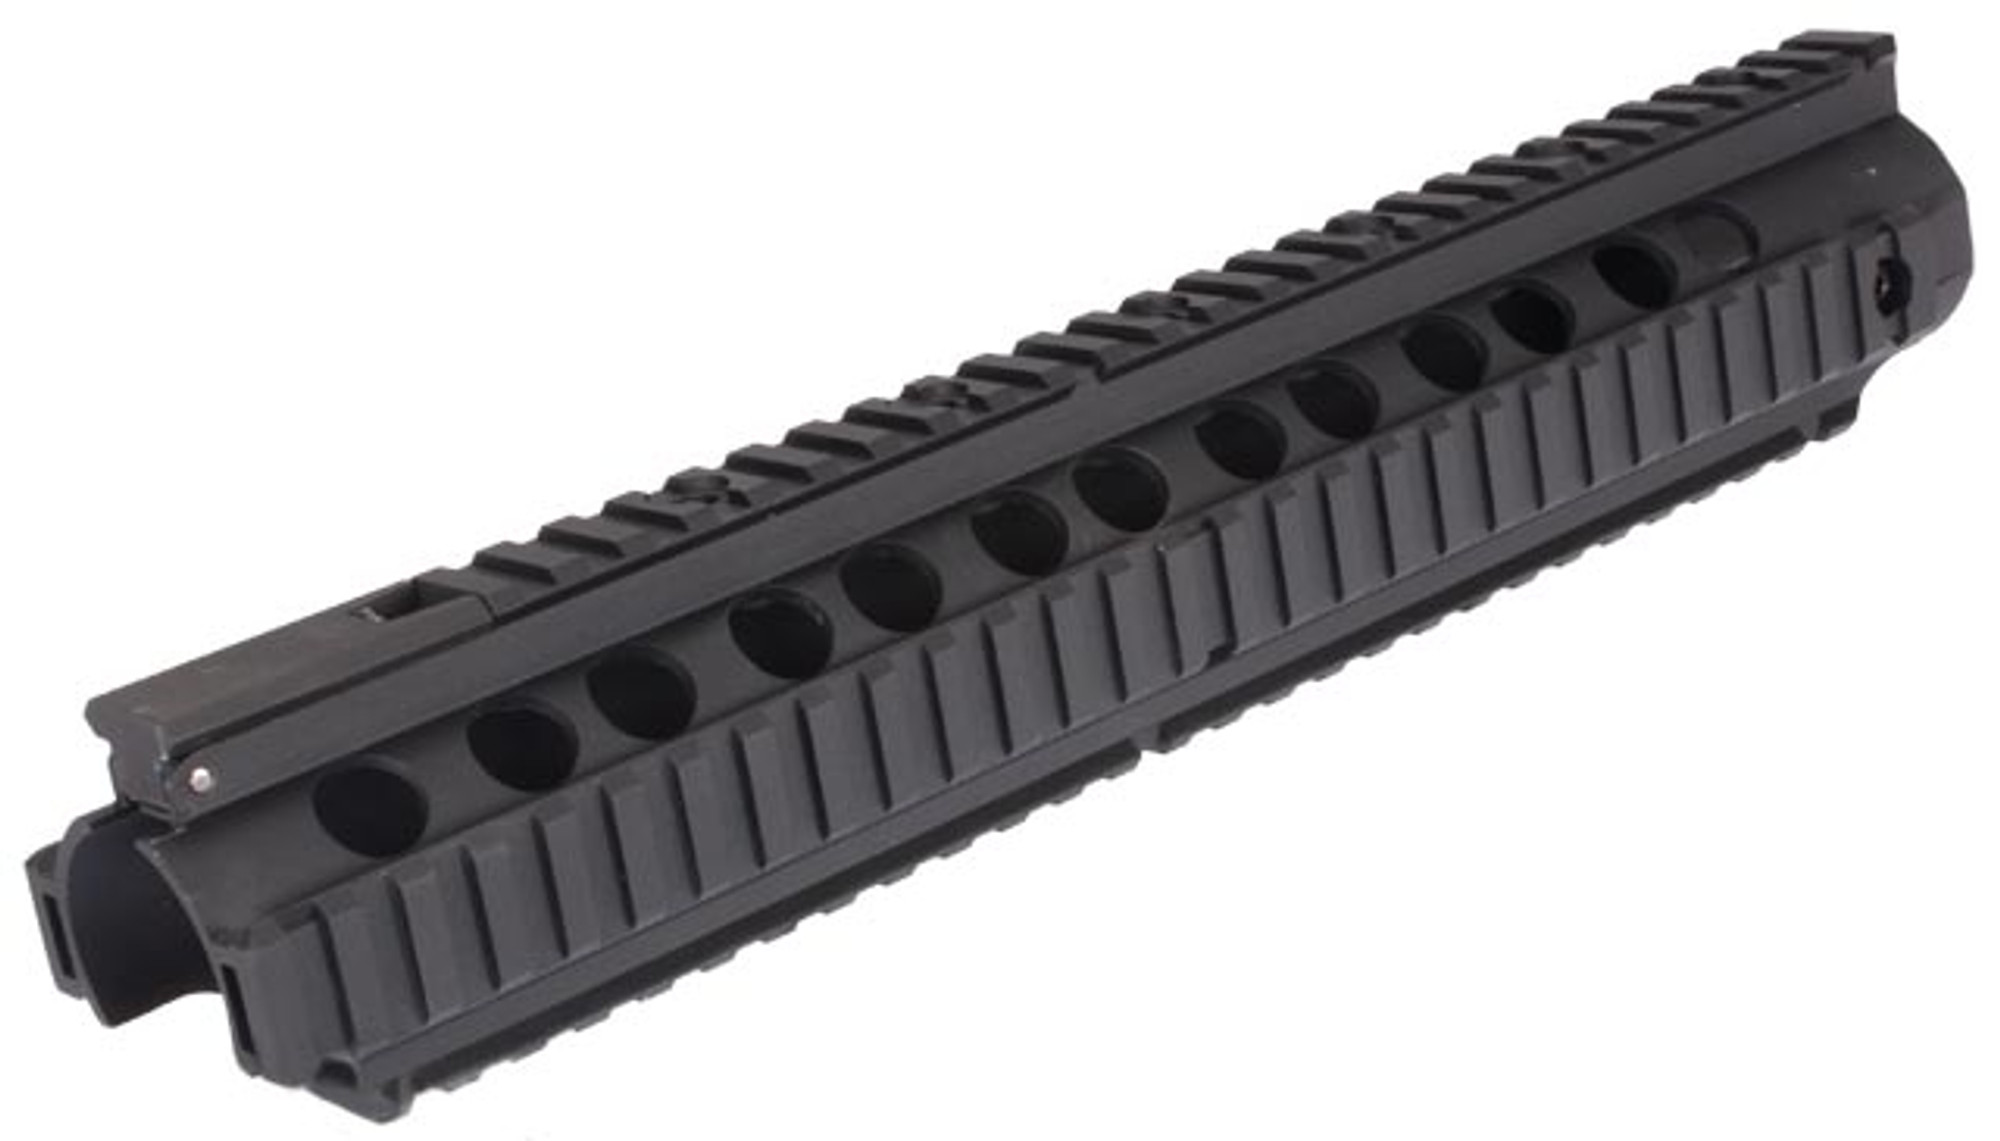 Matrix SR-12 12.5" RIS w/ Integrated front sight for M4 Series Airsoft AEG Rifles